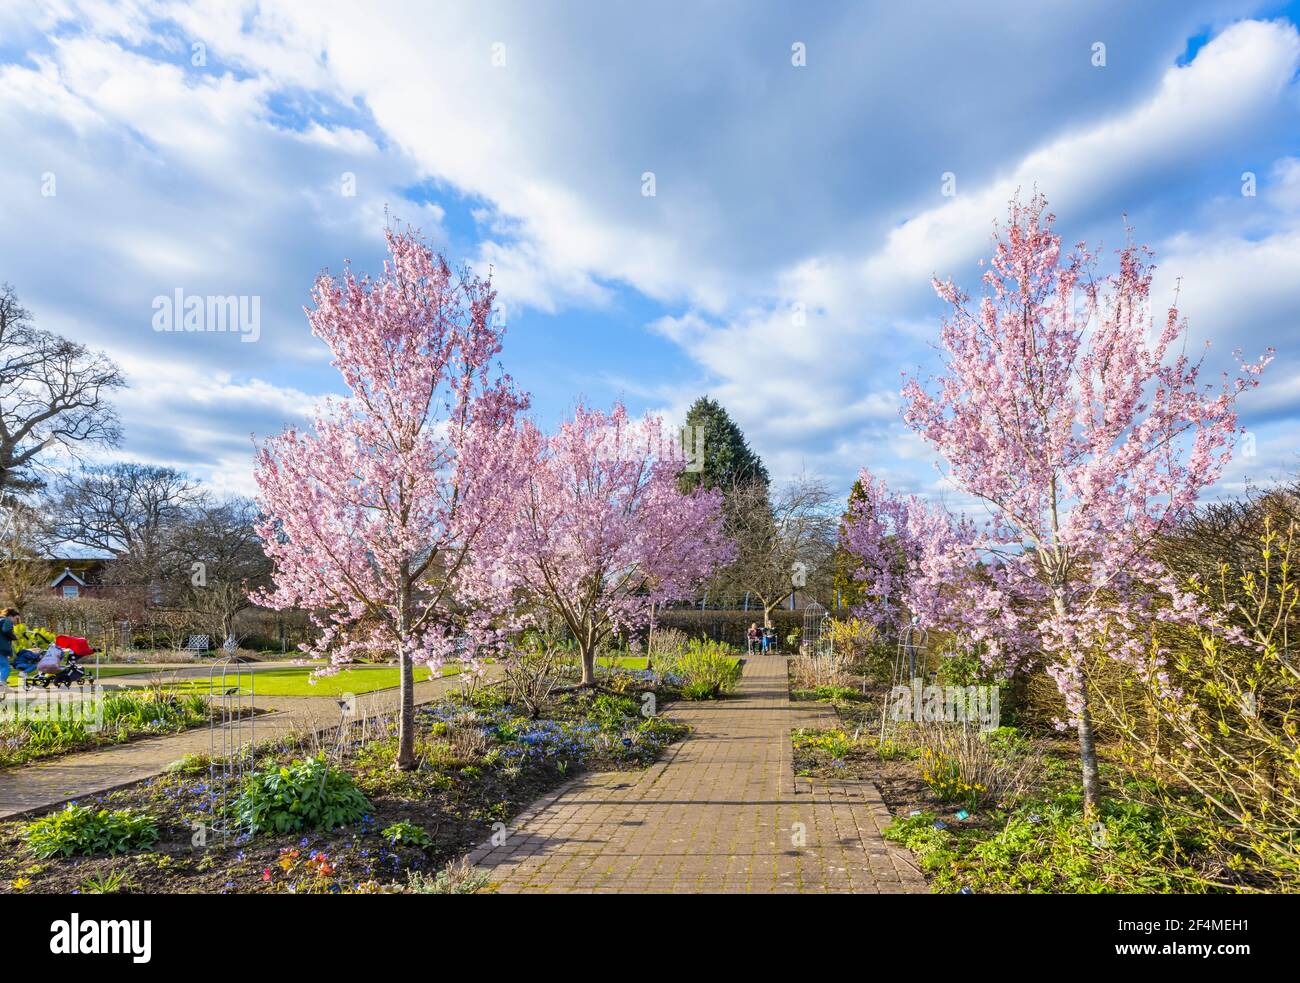 Prunus pendula var. ascendens 'Rosea', ornamental weeping cherry tree with pink blossom in RHS Garden, Wisley, Surrey, SE England in early spring Stock Photo